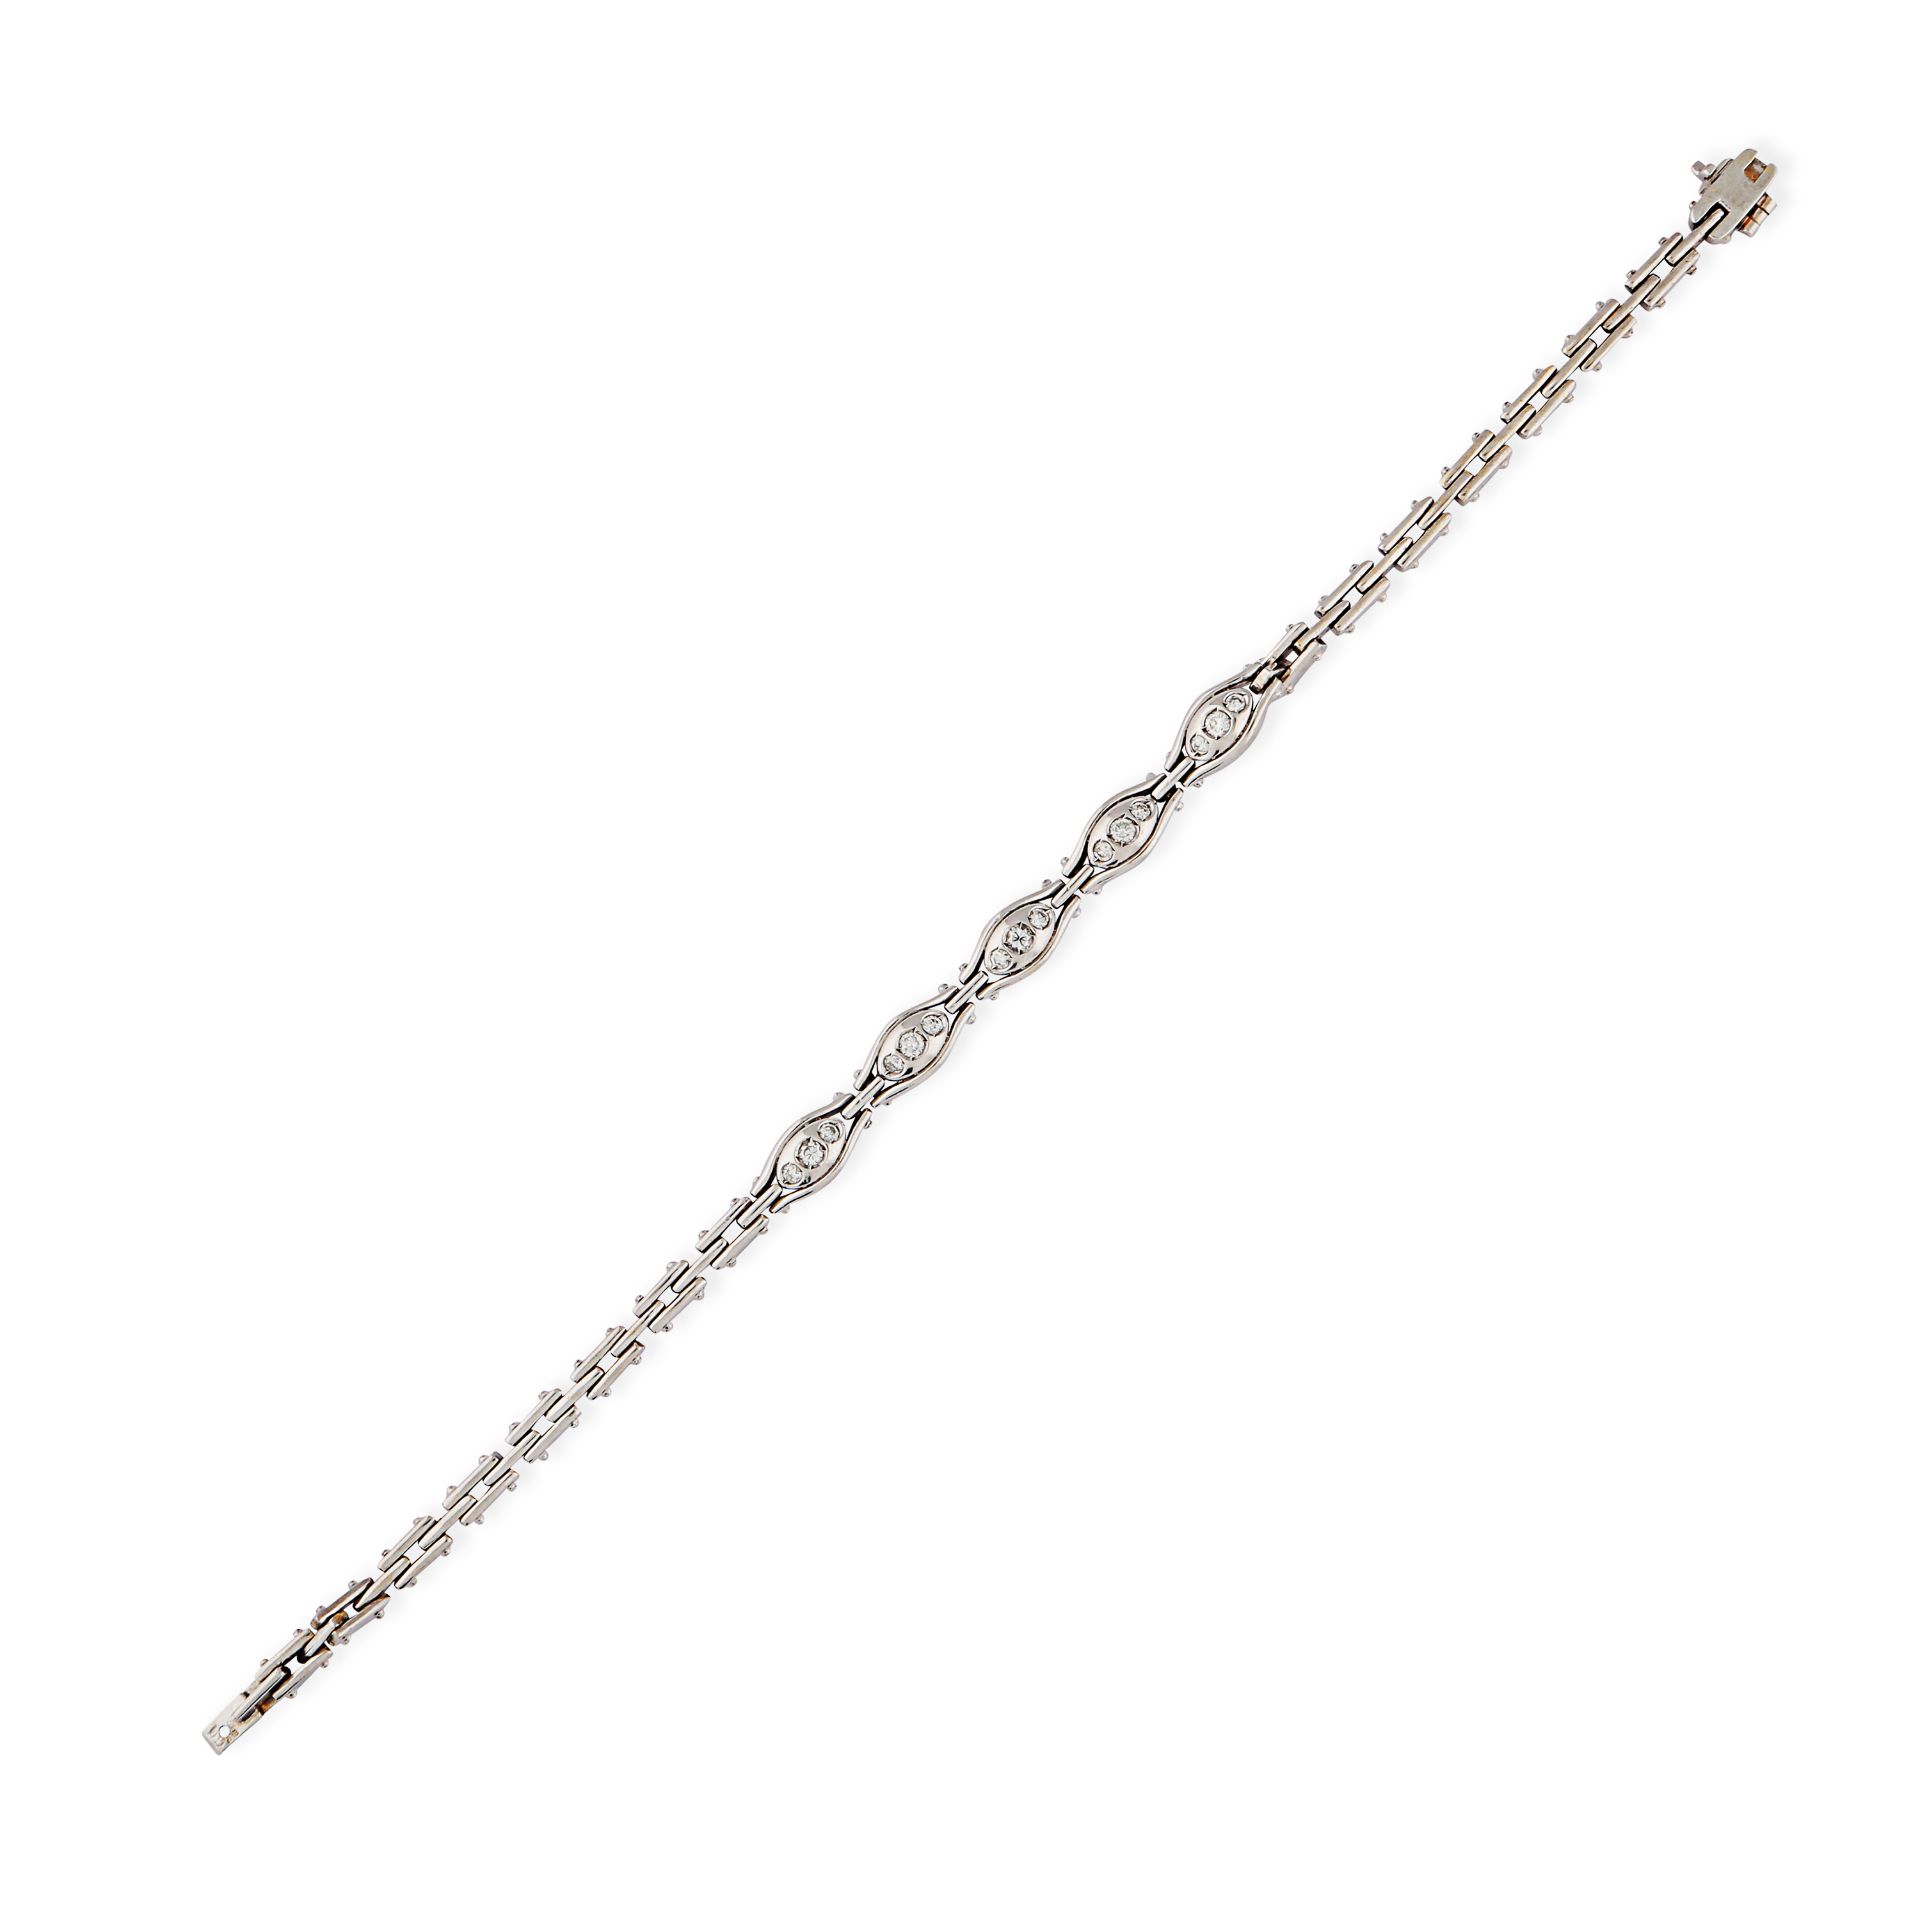 A DIAMOND BRACELET in 18ct white gold, comprising a row of fancy links set with trios of round br...